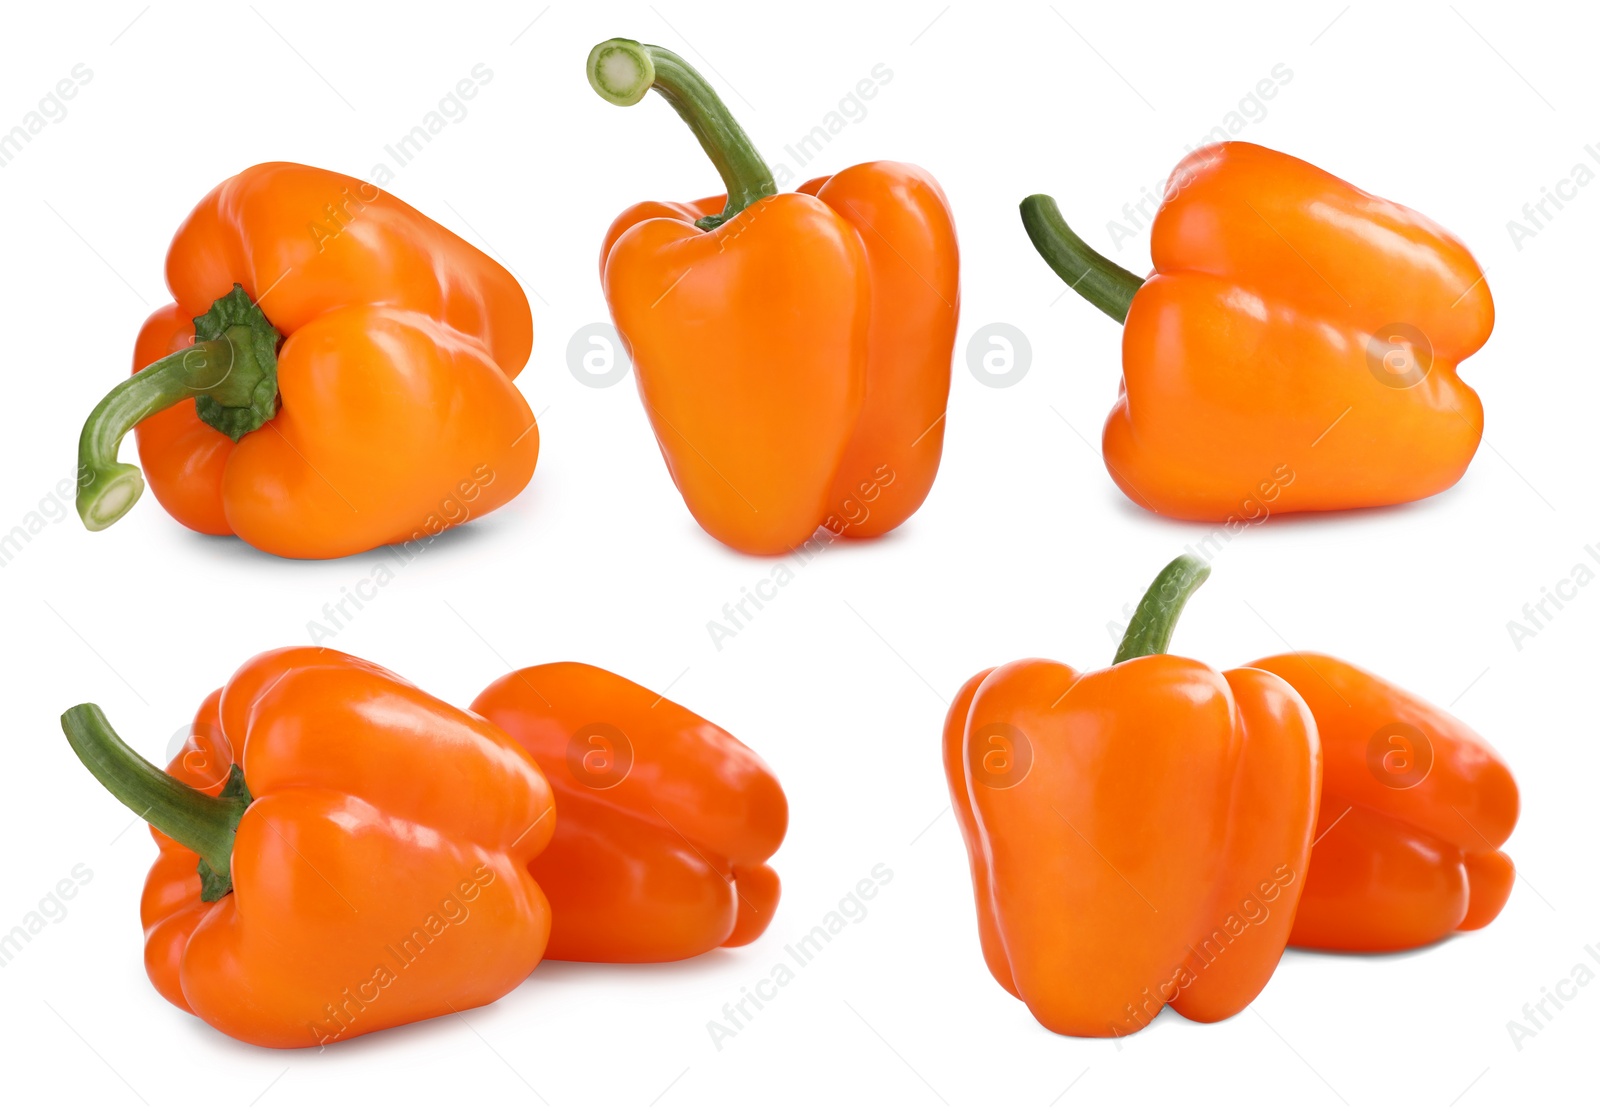 Image of Set of ripe orange bell peppers on white background